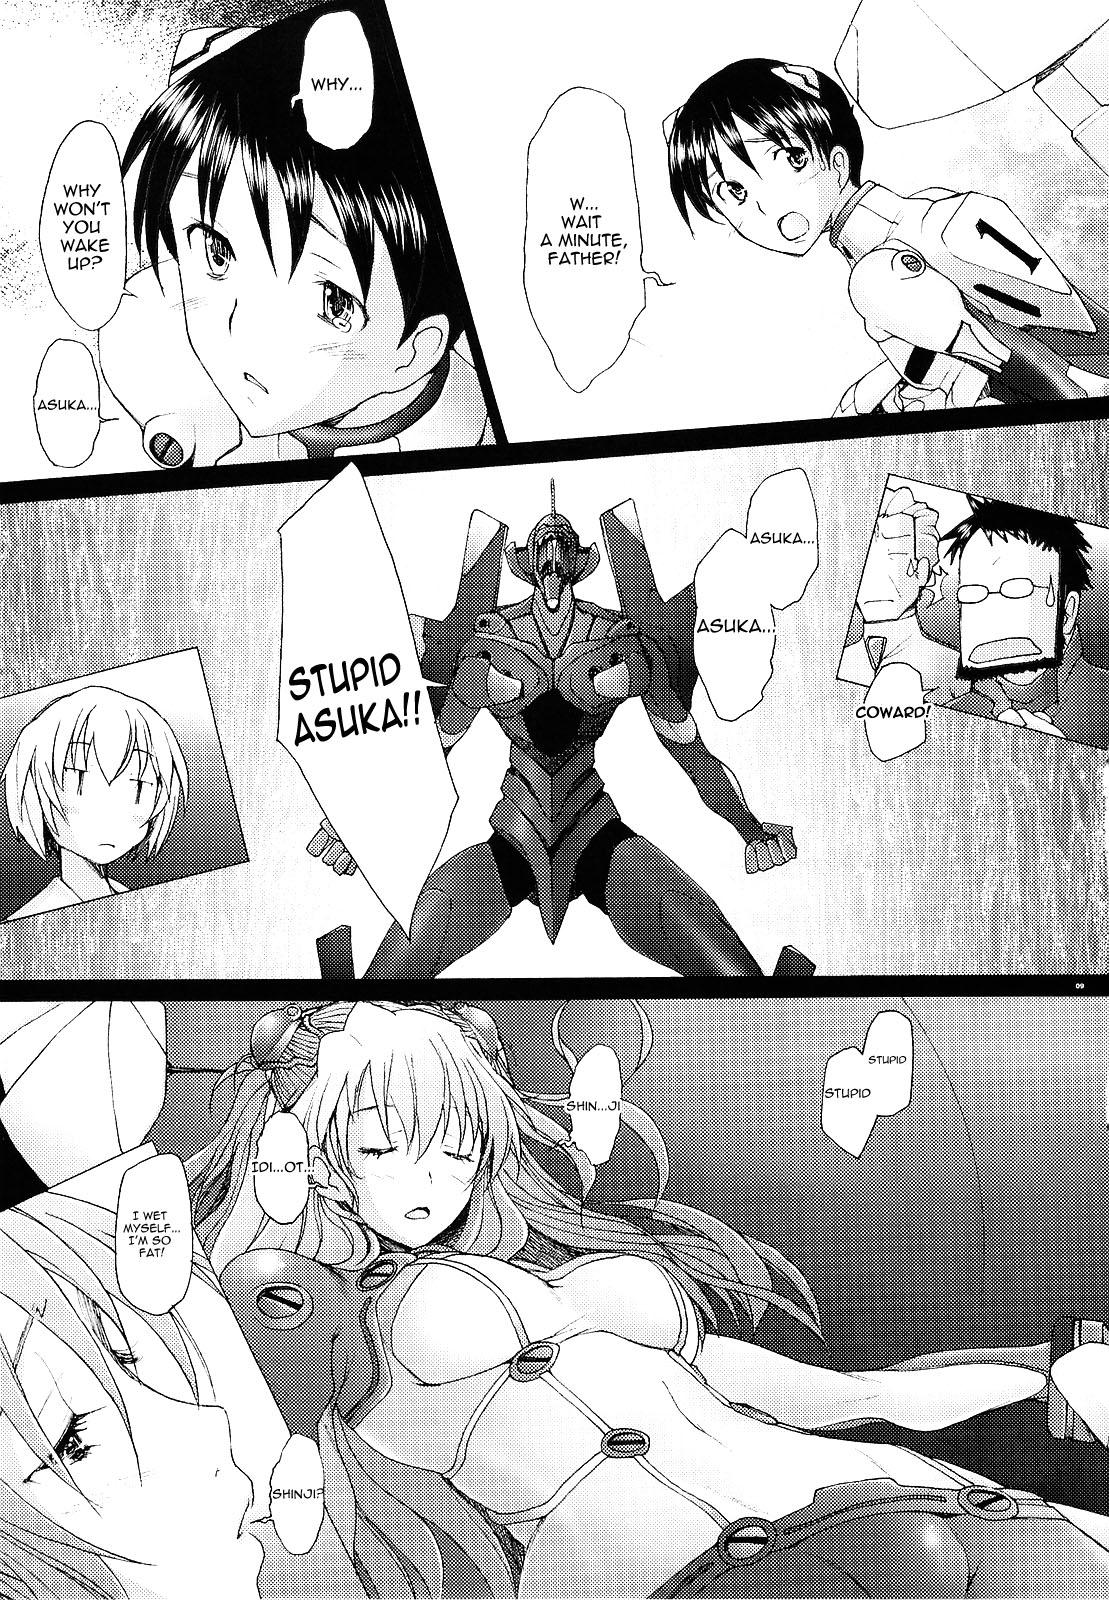 Softcore Confusion LEVEL A vol. 3 - Neon genesis evangelion Calcinha - Page 9